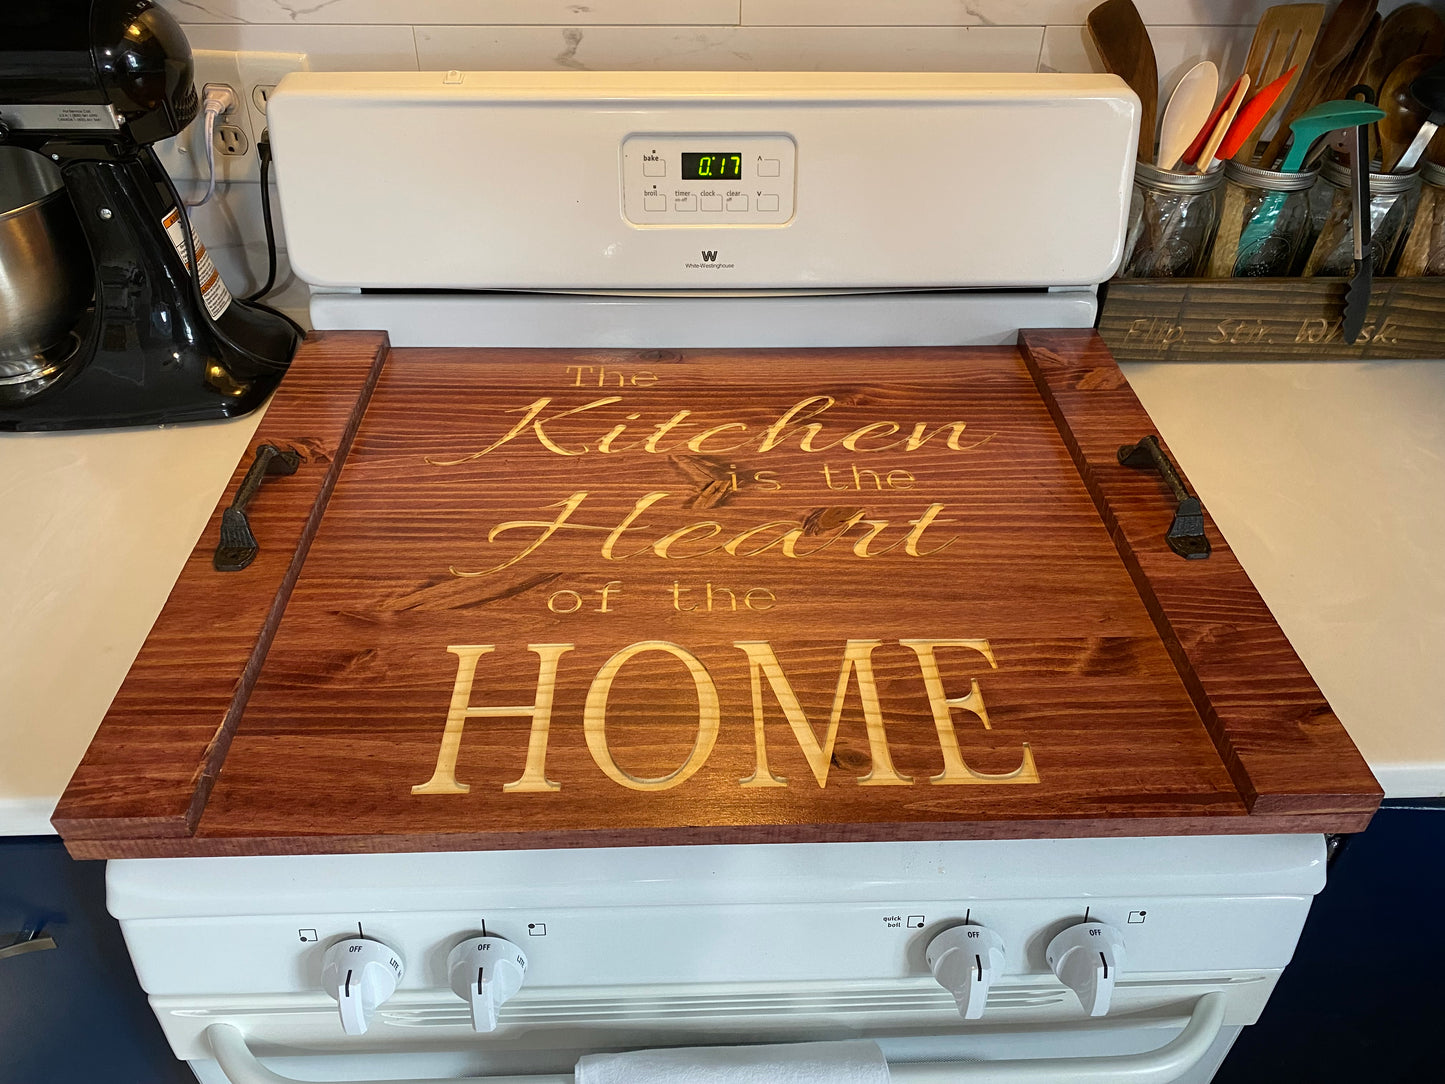 The Kitchen is the Heart of the Home Carved Noodle Board